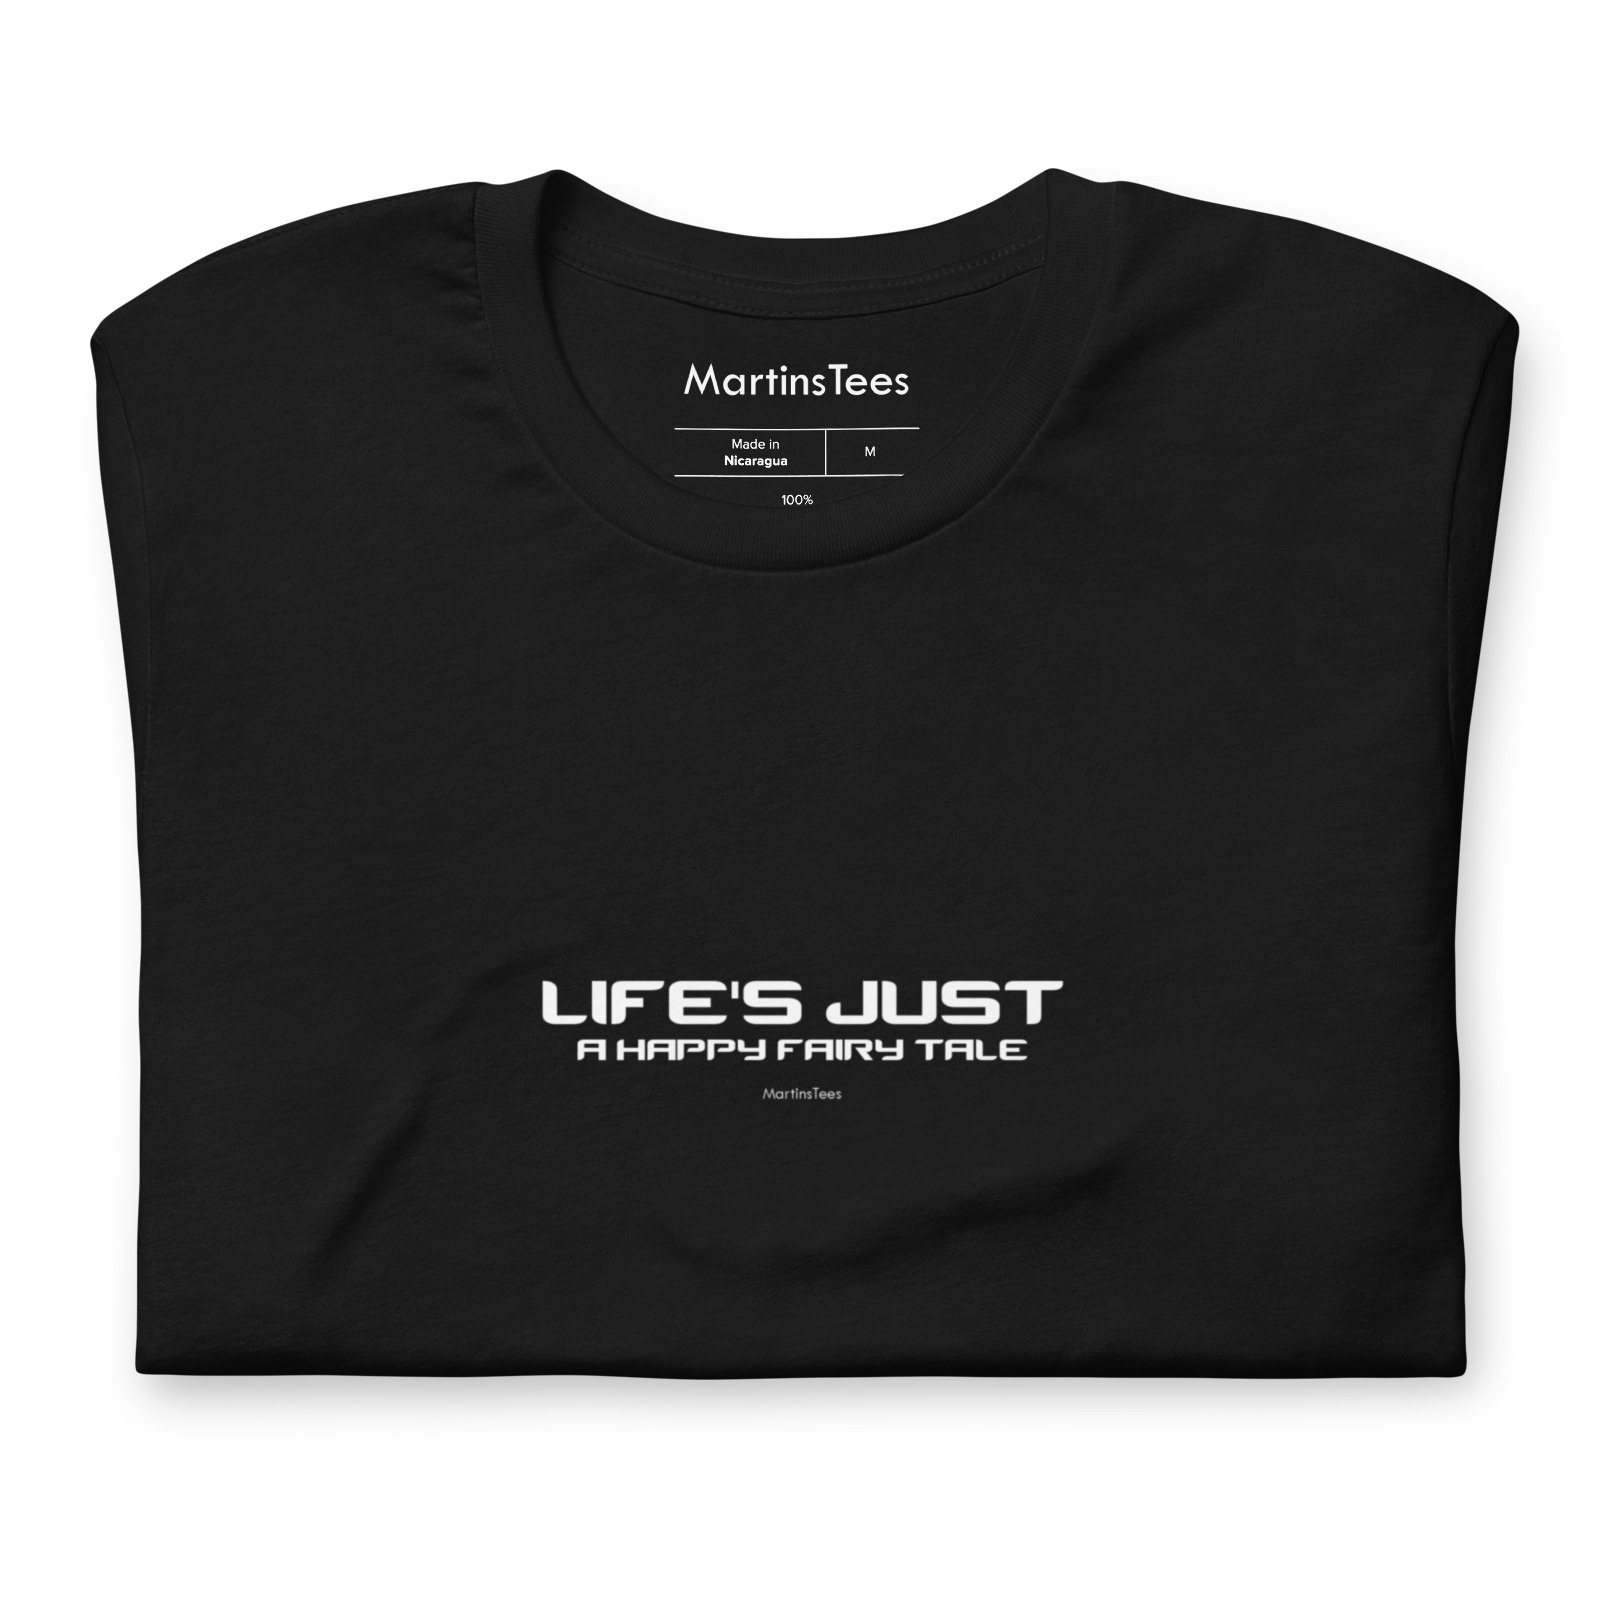 T-shirt: LIFE'S JUST - A HAPPY FAIRY TALE